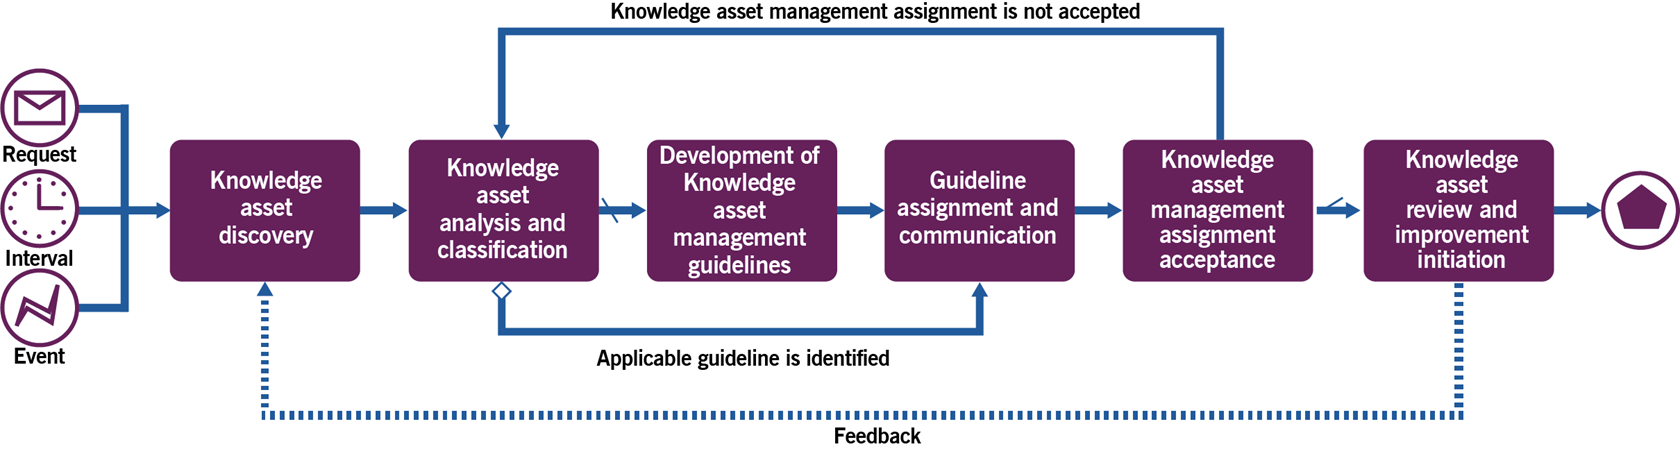 assignment knowledge management